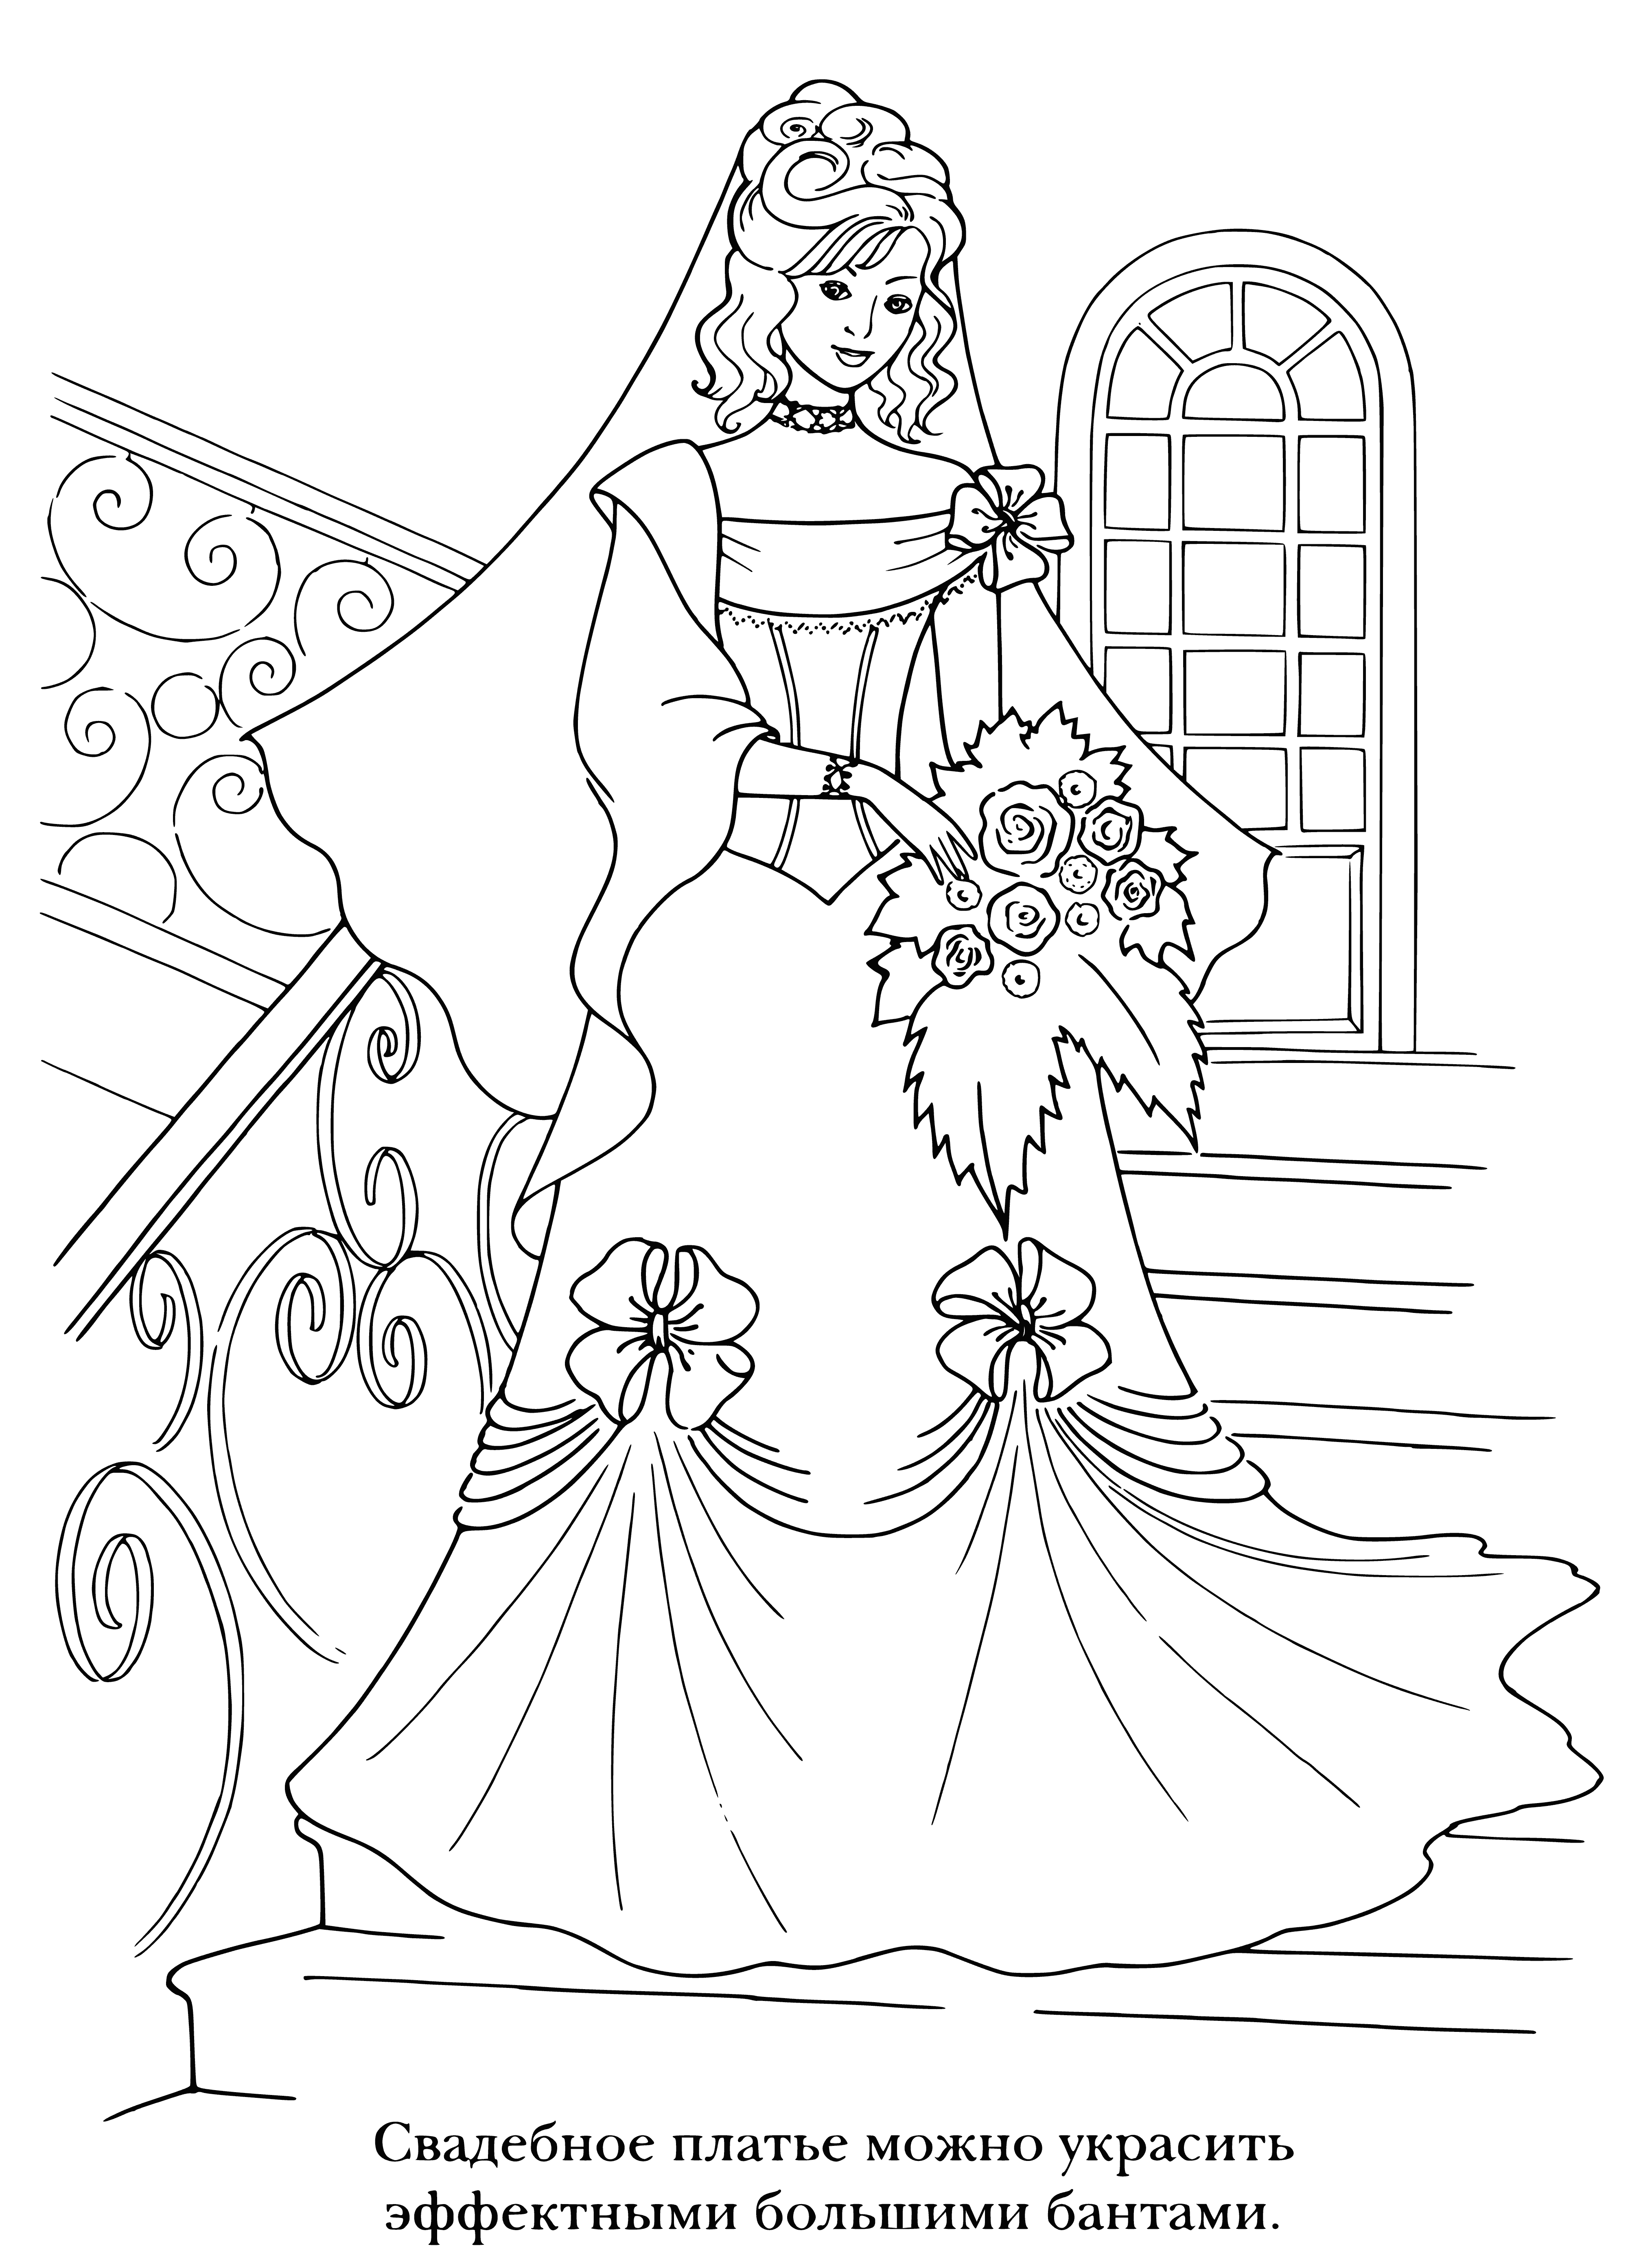 Bride on the stairs coloring page